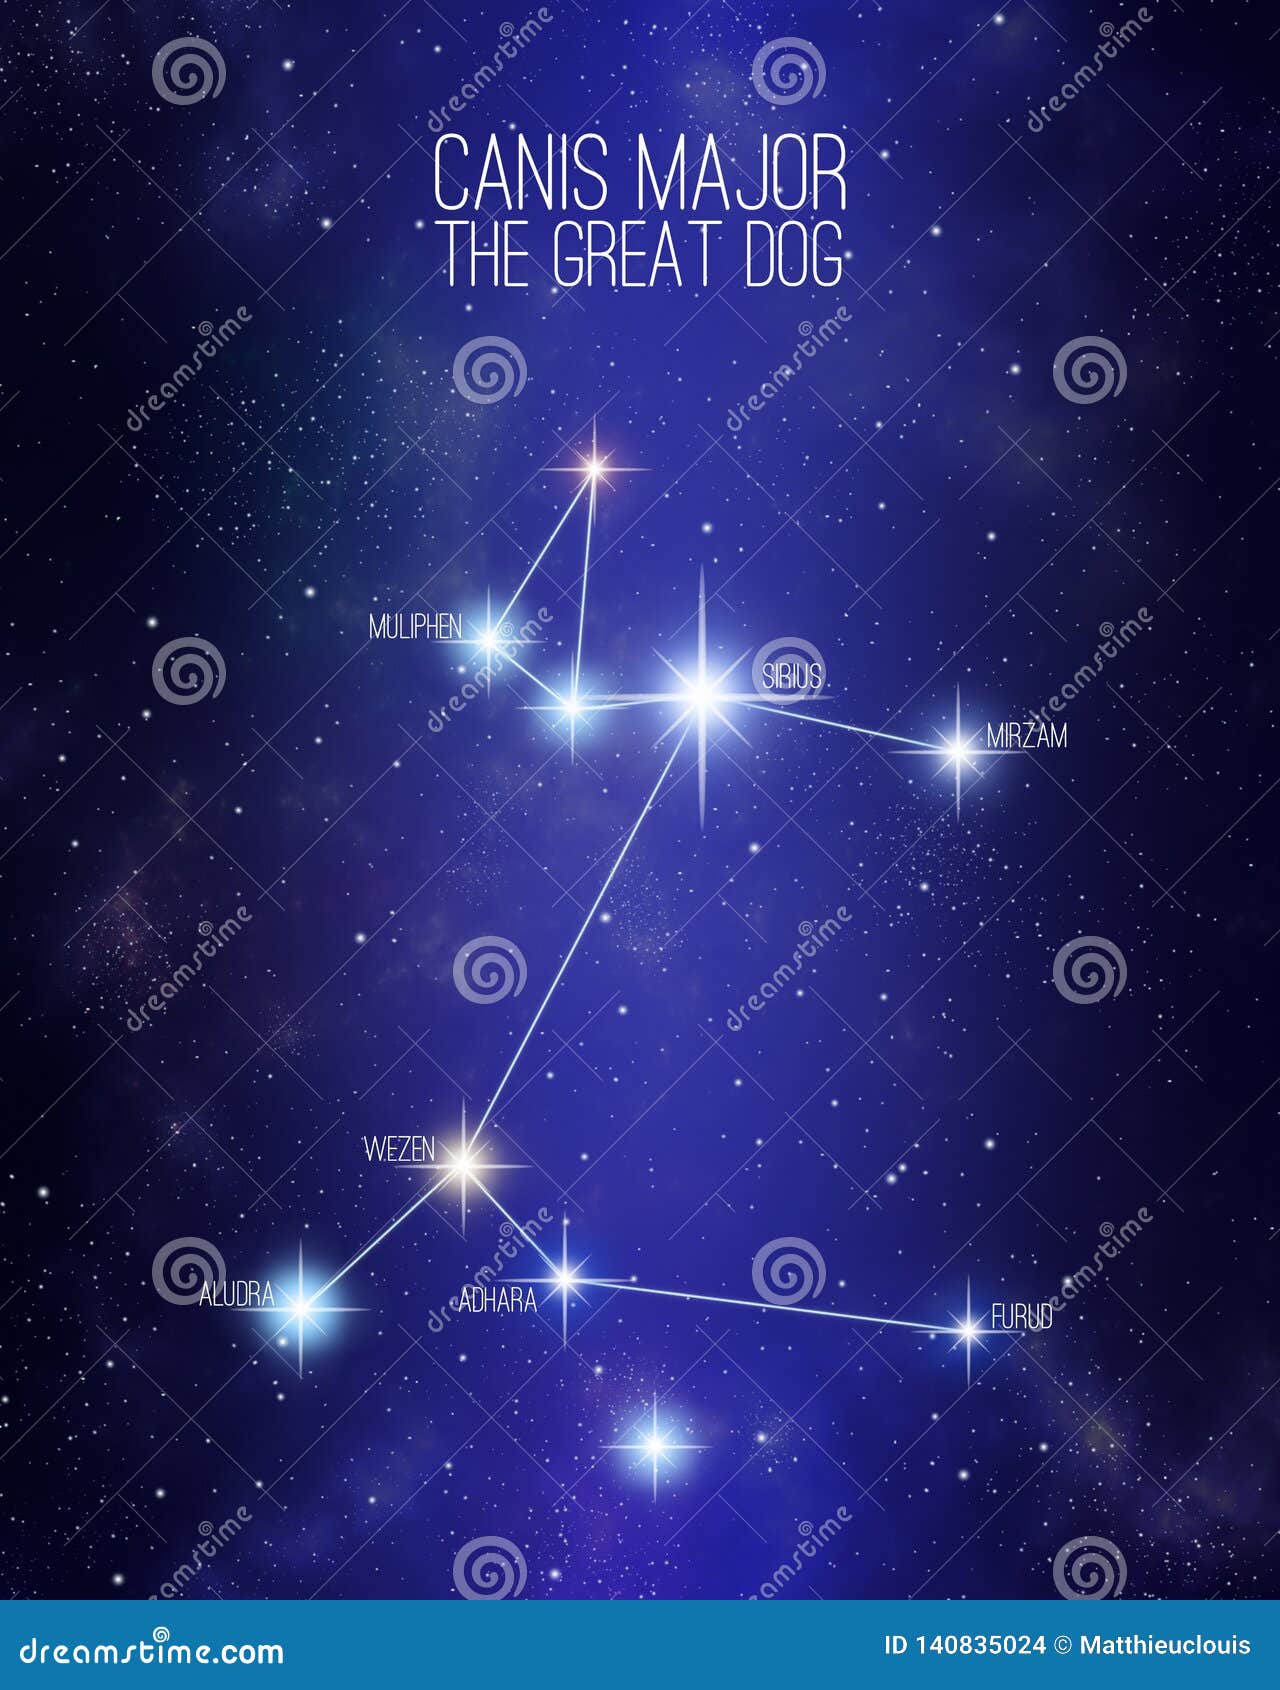 canis major the great dog constellation on a starry space background